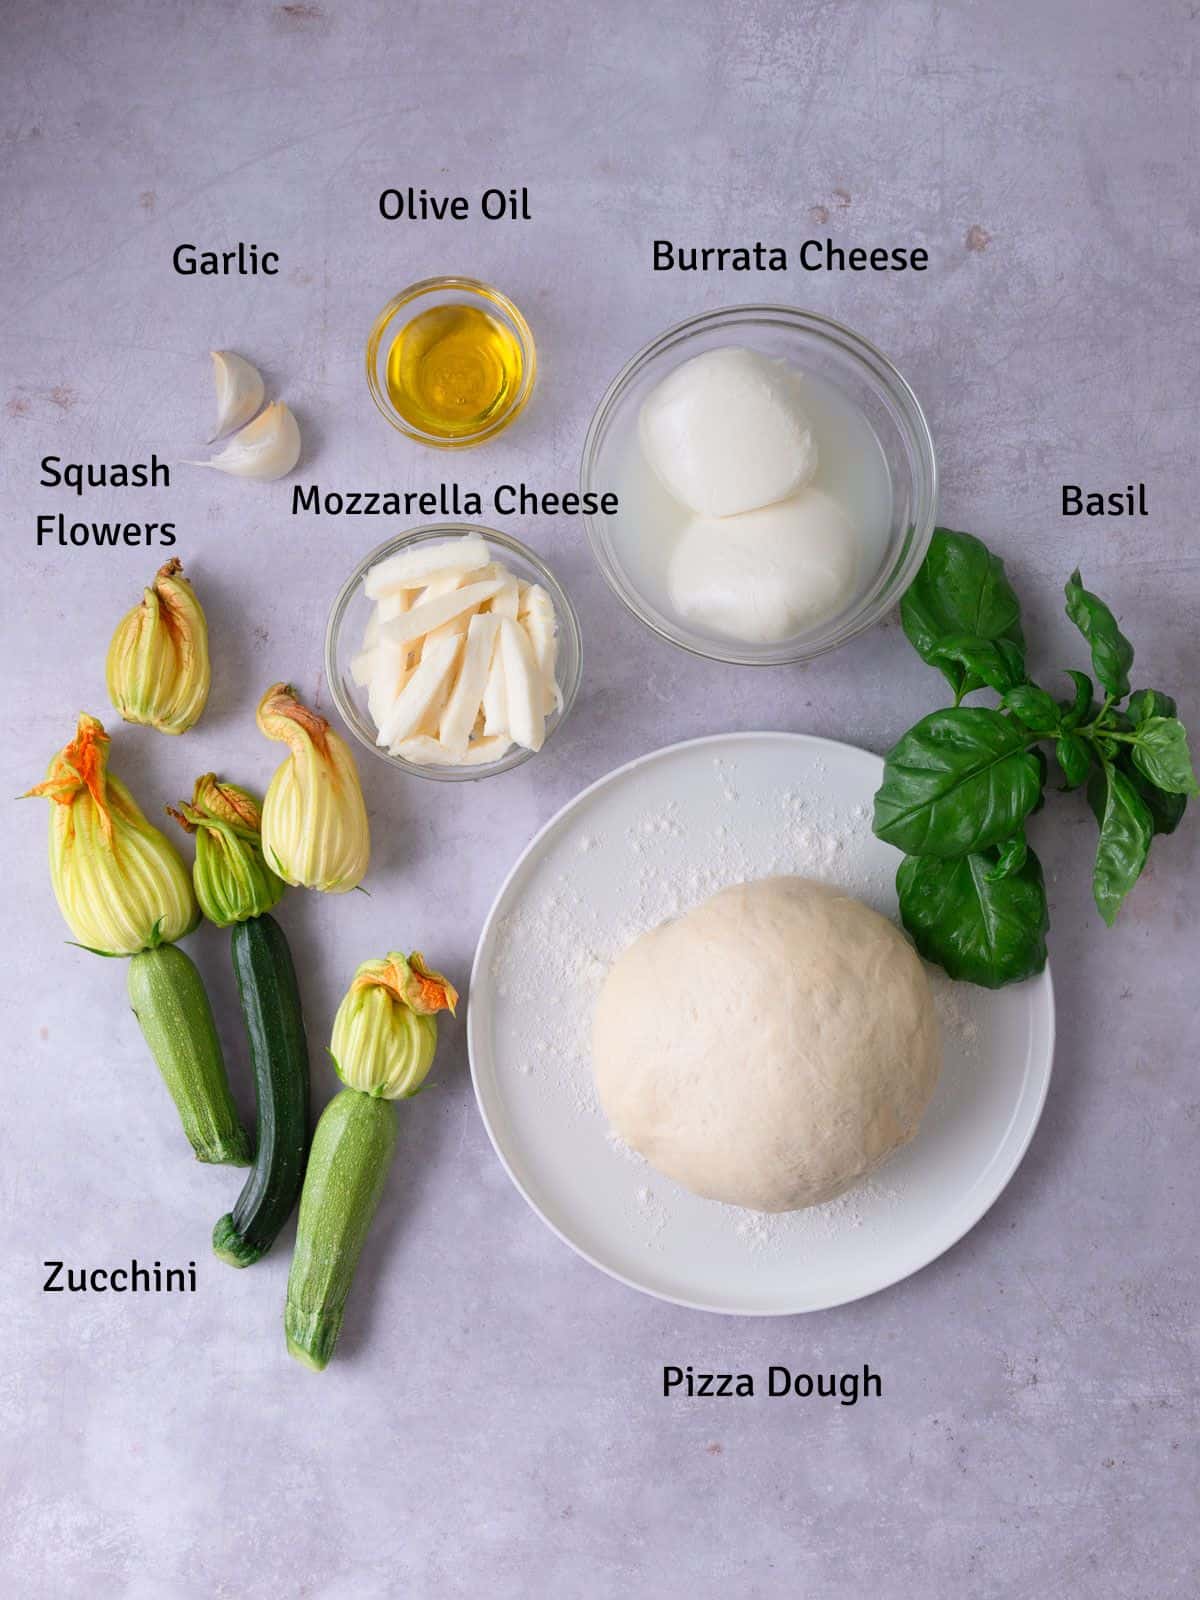 Ingredients for squash blossom pizza.